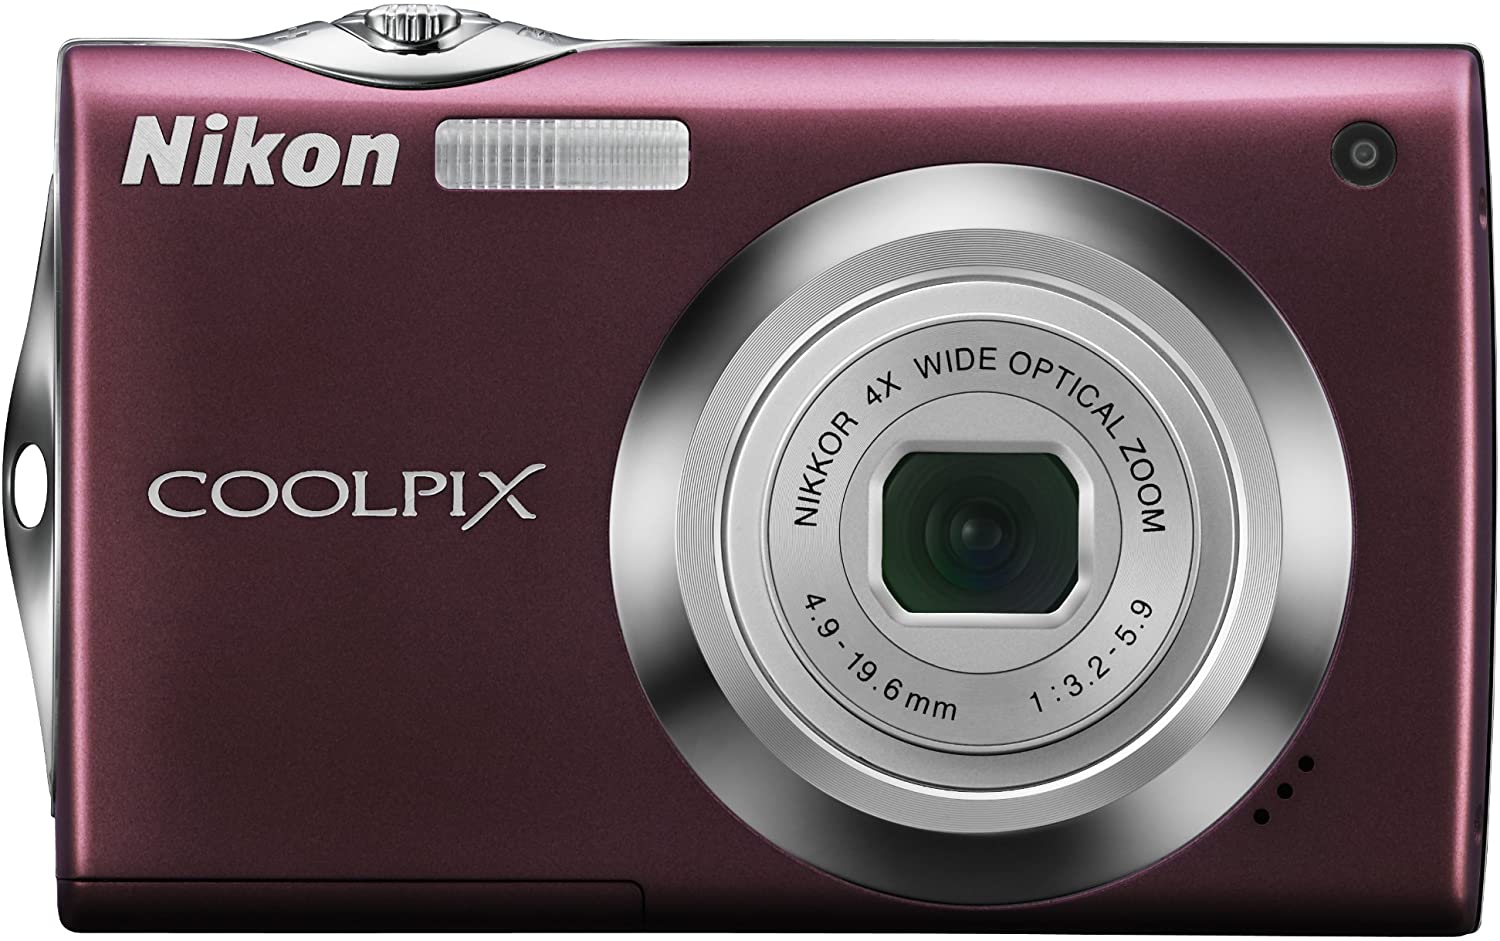 Nikon Coolpix S4000 12 MP Digital Camera with 4x Optical Vibration Reduction (VR) Zoom and 3.0-Inch Touch-Panel LCD (Silver)